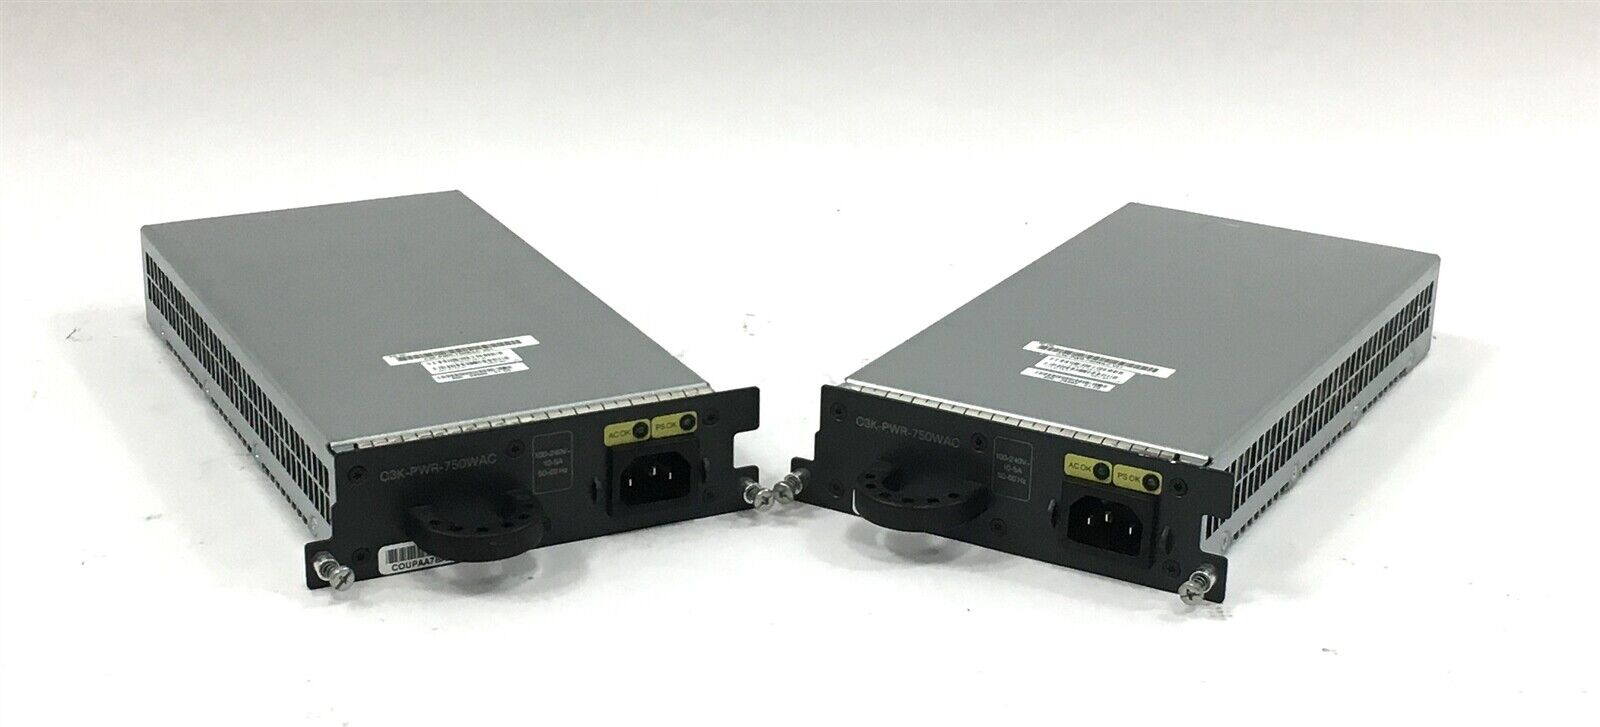 Lot of 2 Cisco C3K-PWR-750WAC 750W Power Supply for RPS2300